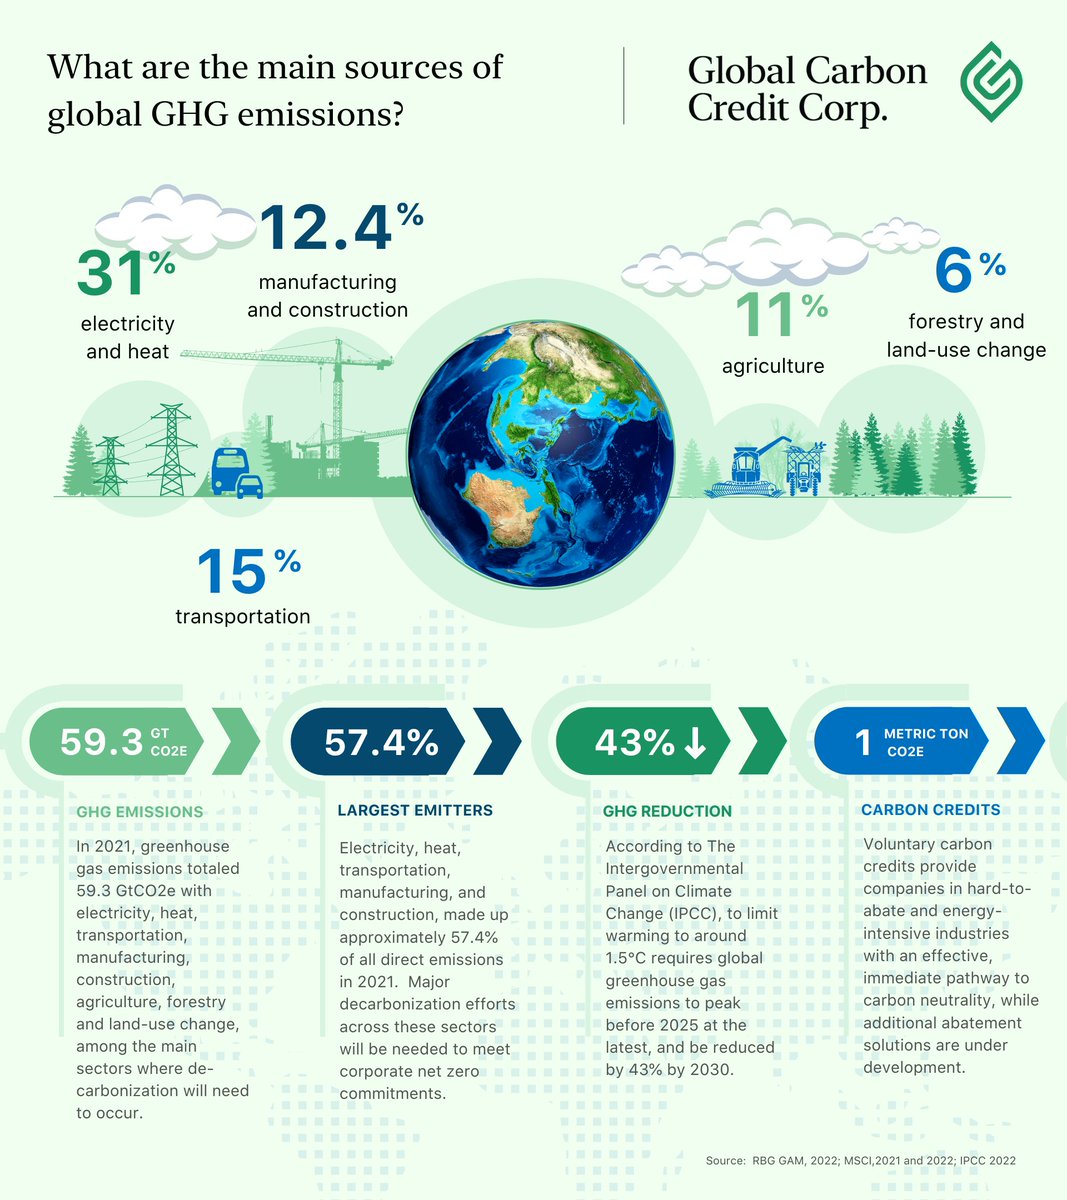 Reducing #GHGemissions across the global economy requires major #decarbonization including reductions in #fossilfuels, #lowemission energy and #conservation, plus #carbonremoval #carbonsequestration #carbonreductions using #voluntarycarboncredits  
globalcarboncreditcorp.com